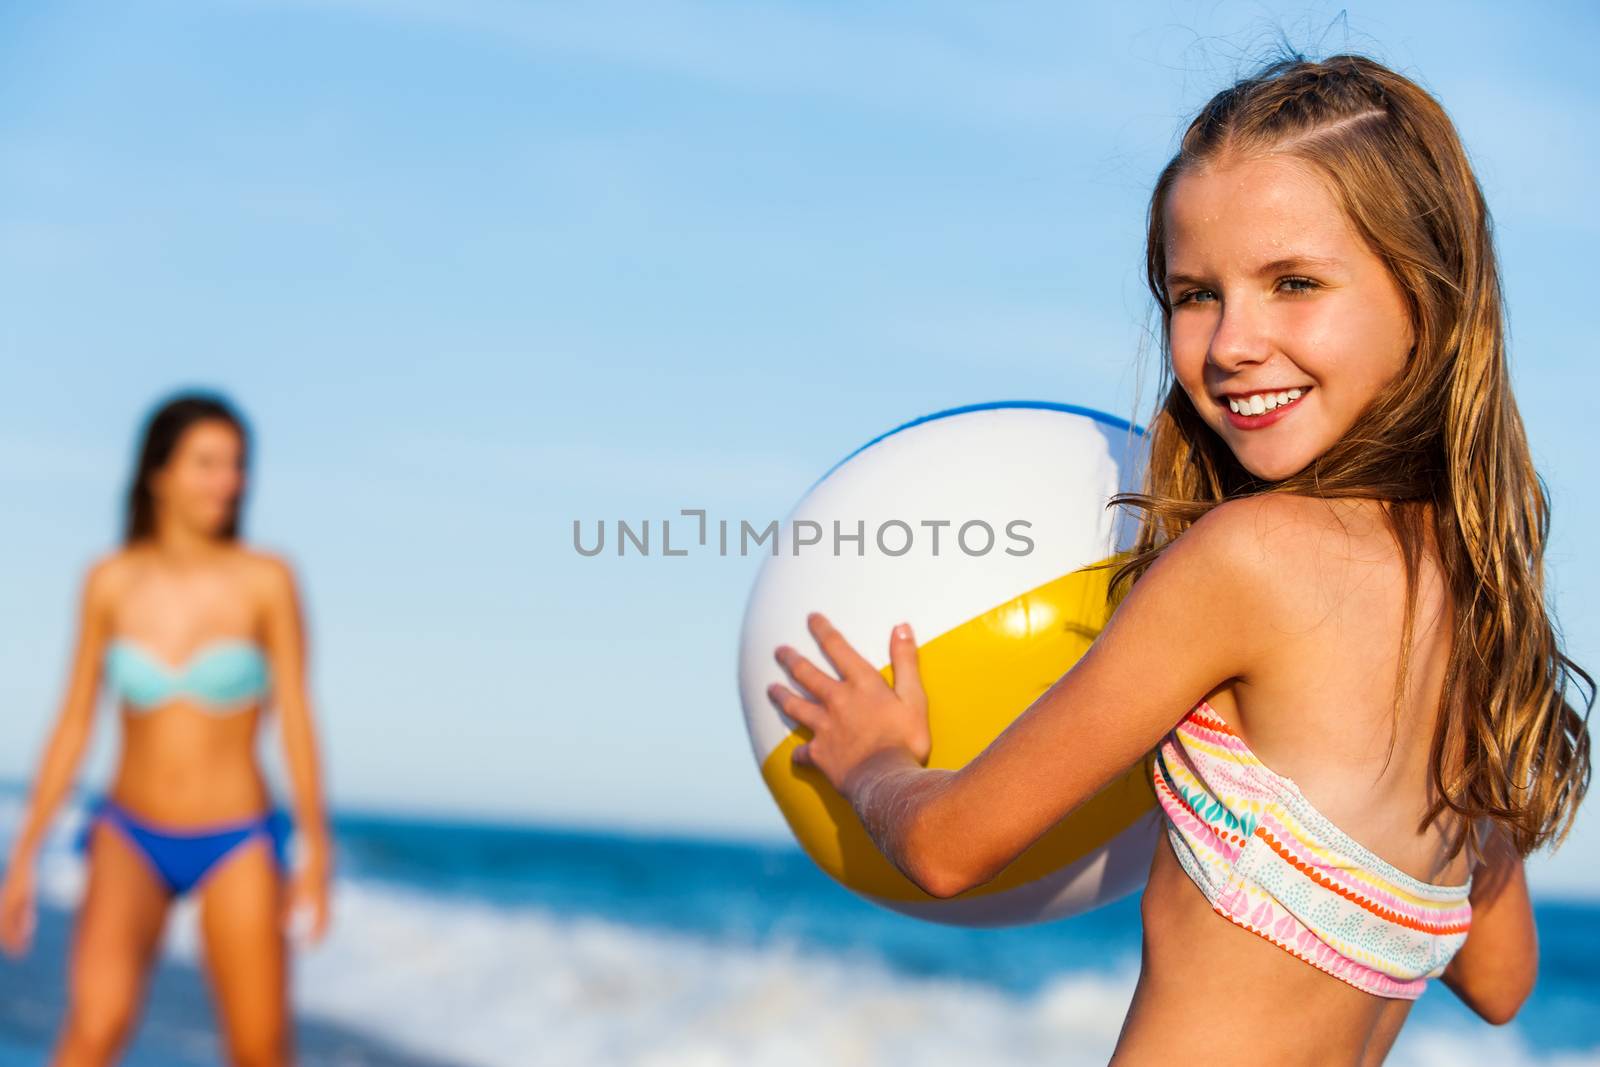 Close up outdoor portrait of young preteen holding inflatable plastic beach ball with mother in background.